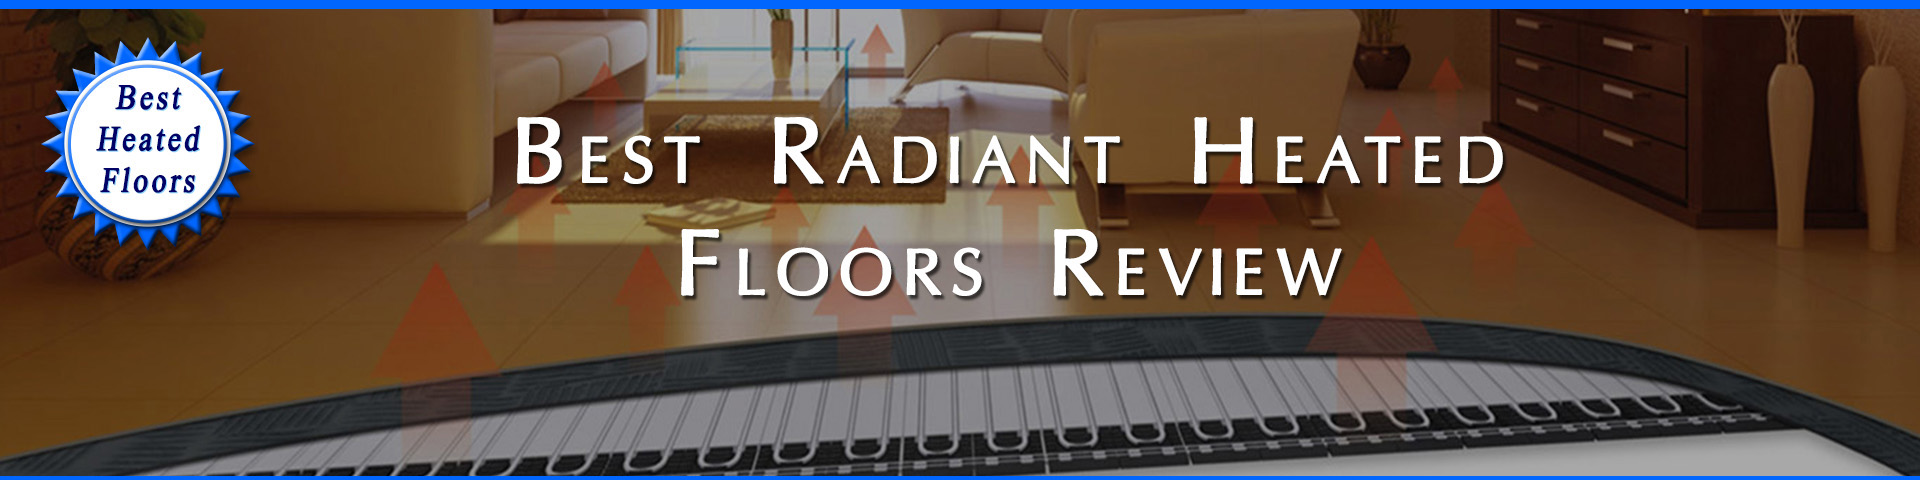 Best heated floor systems banner